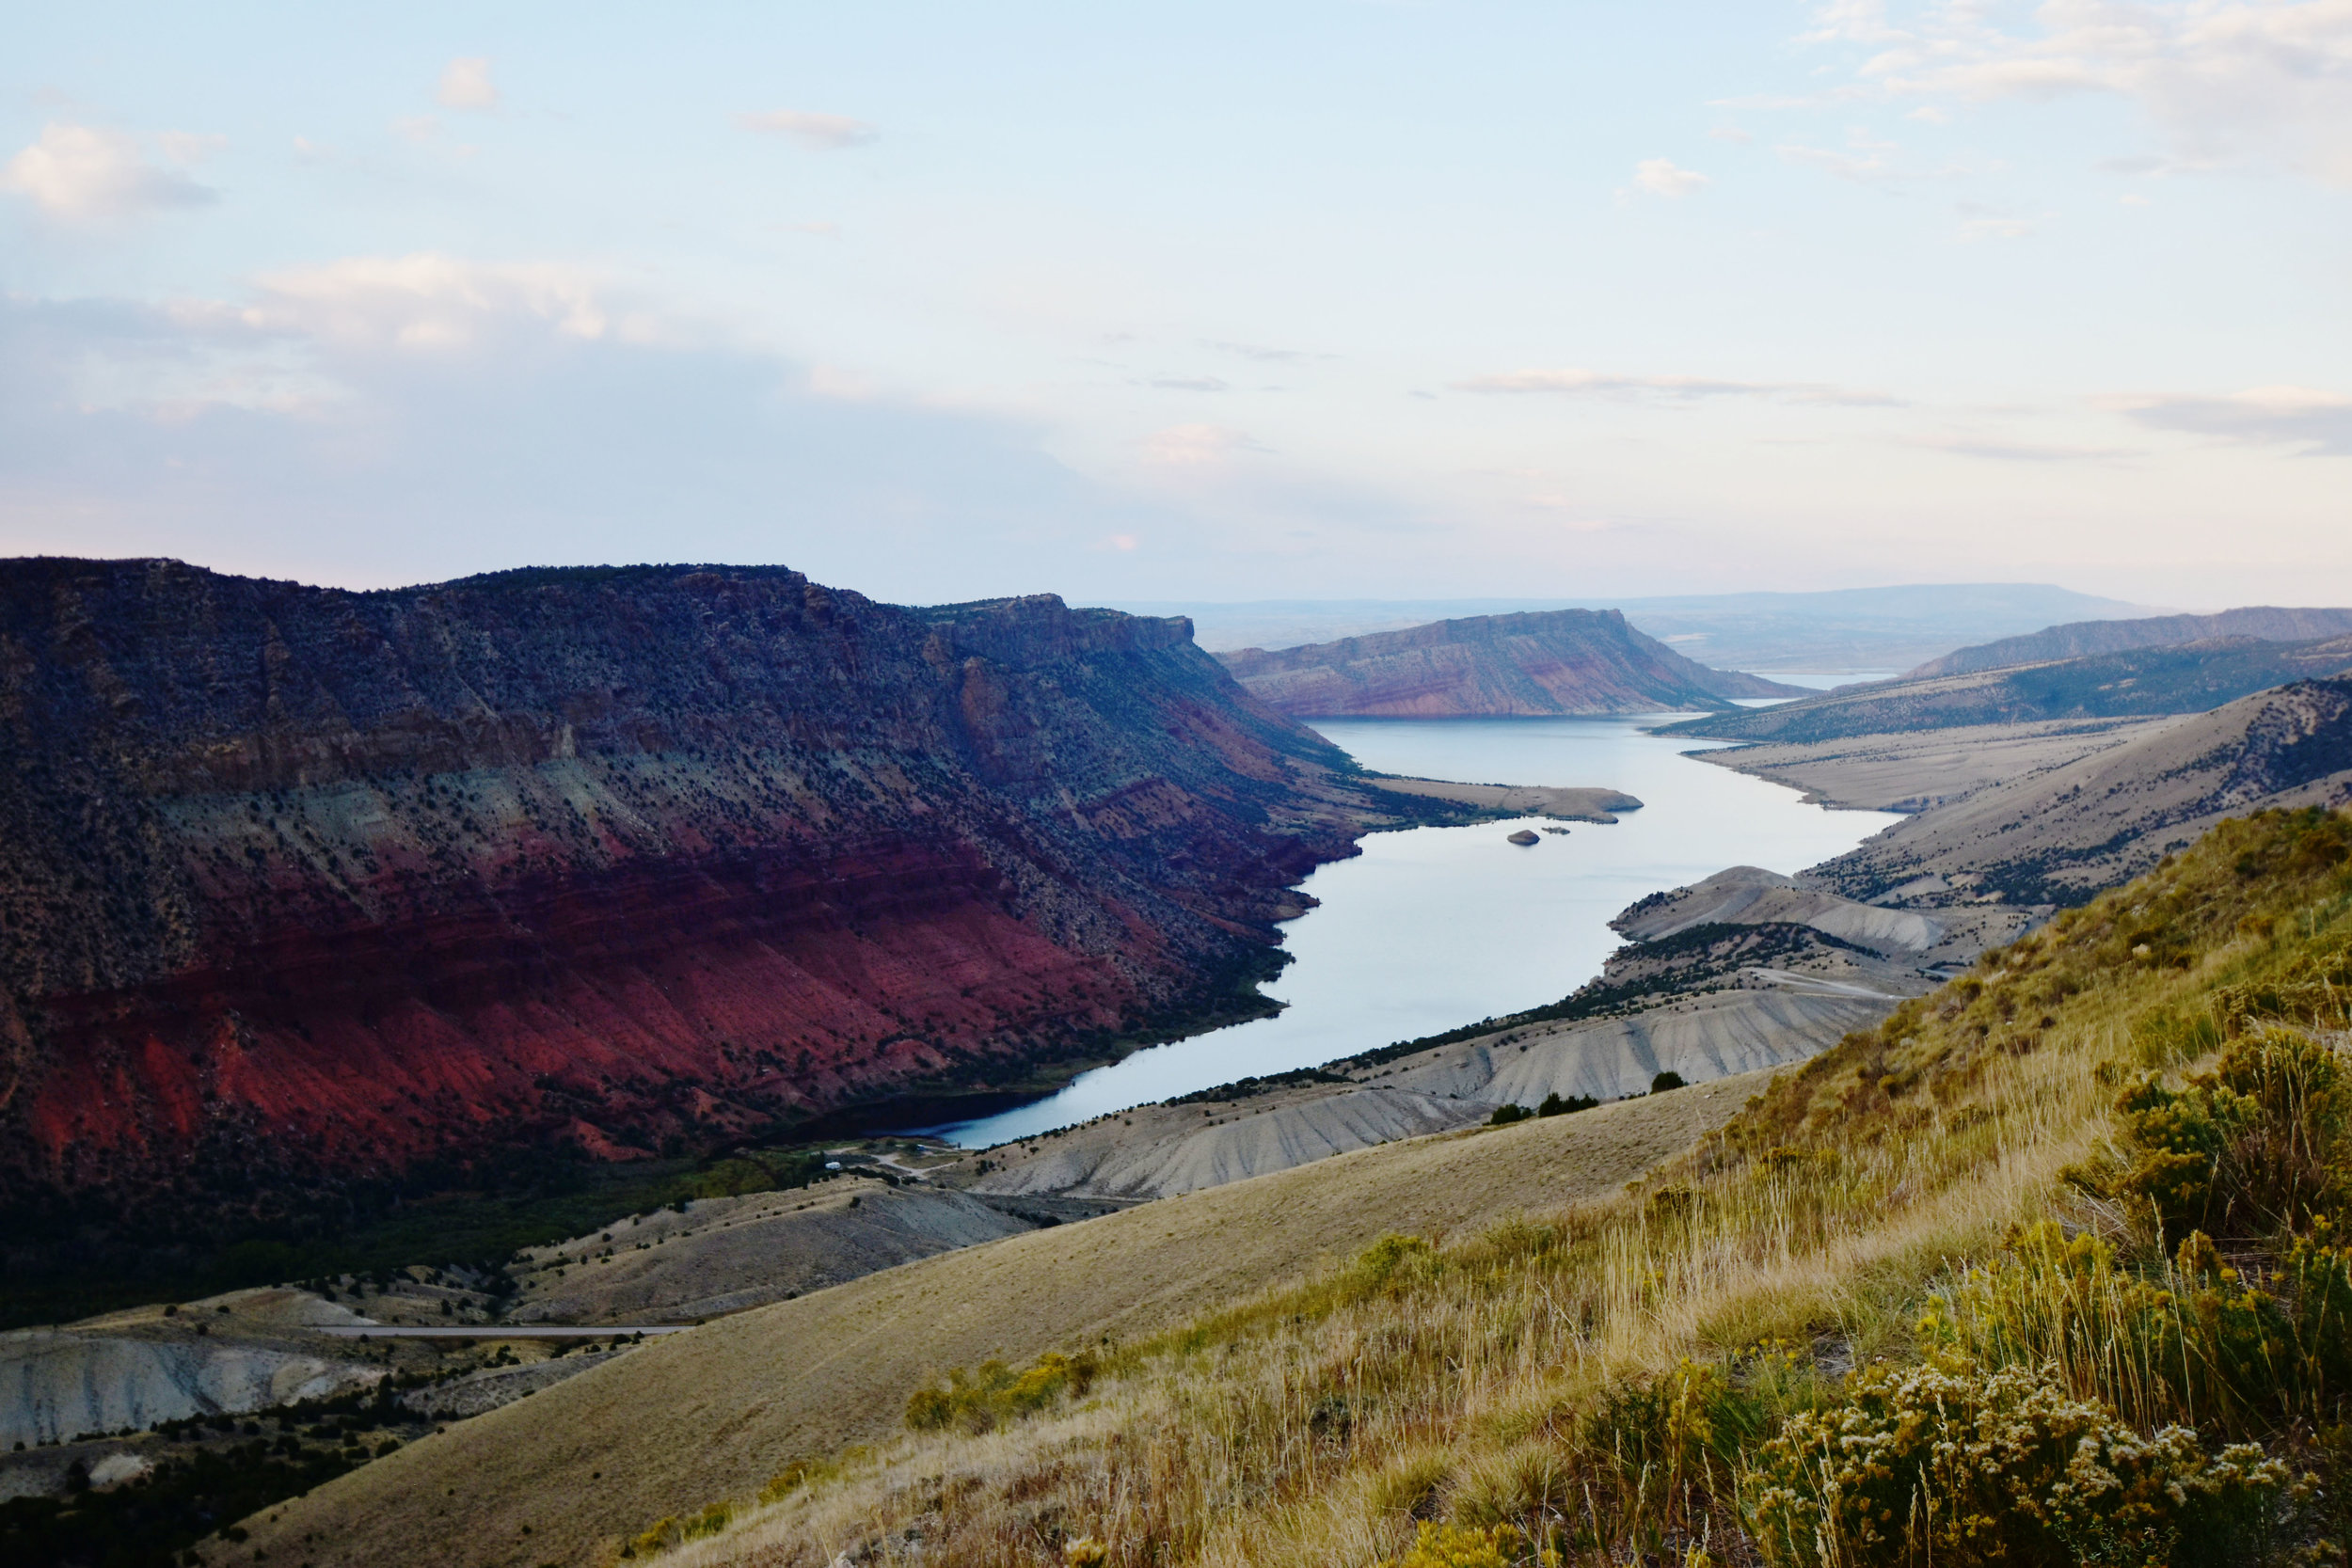  Flaming Gorge as seen on the Utah side.  Look at that beautiful shade of red… it is simple gorgeous.  